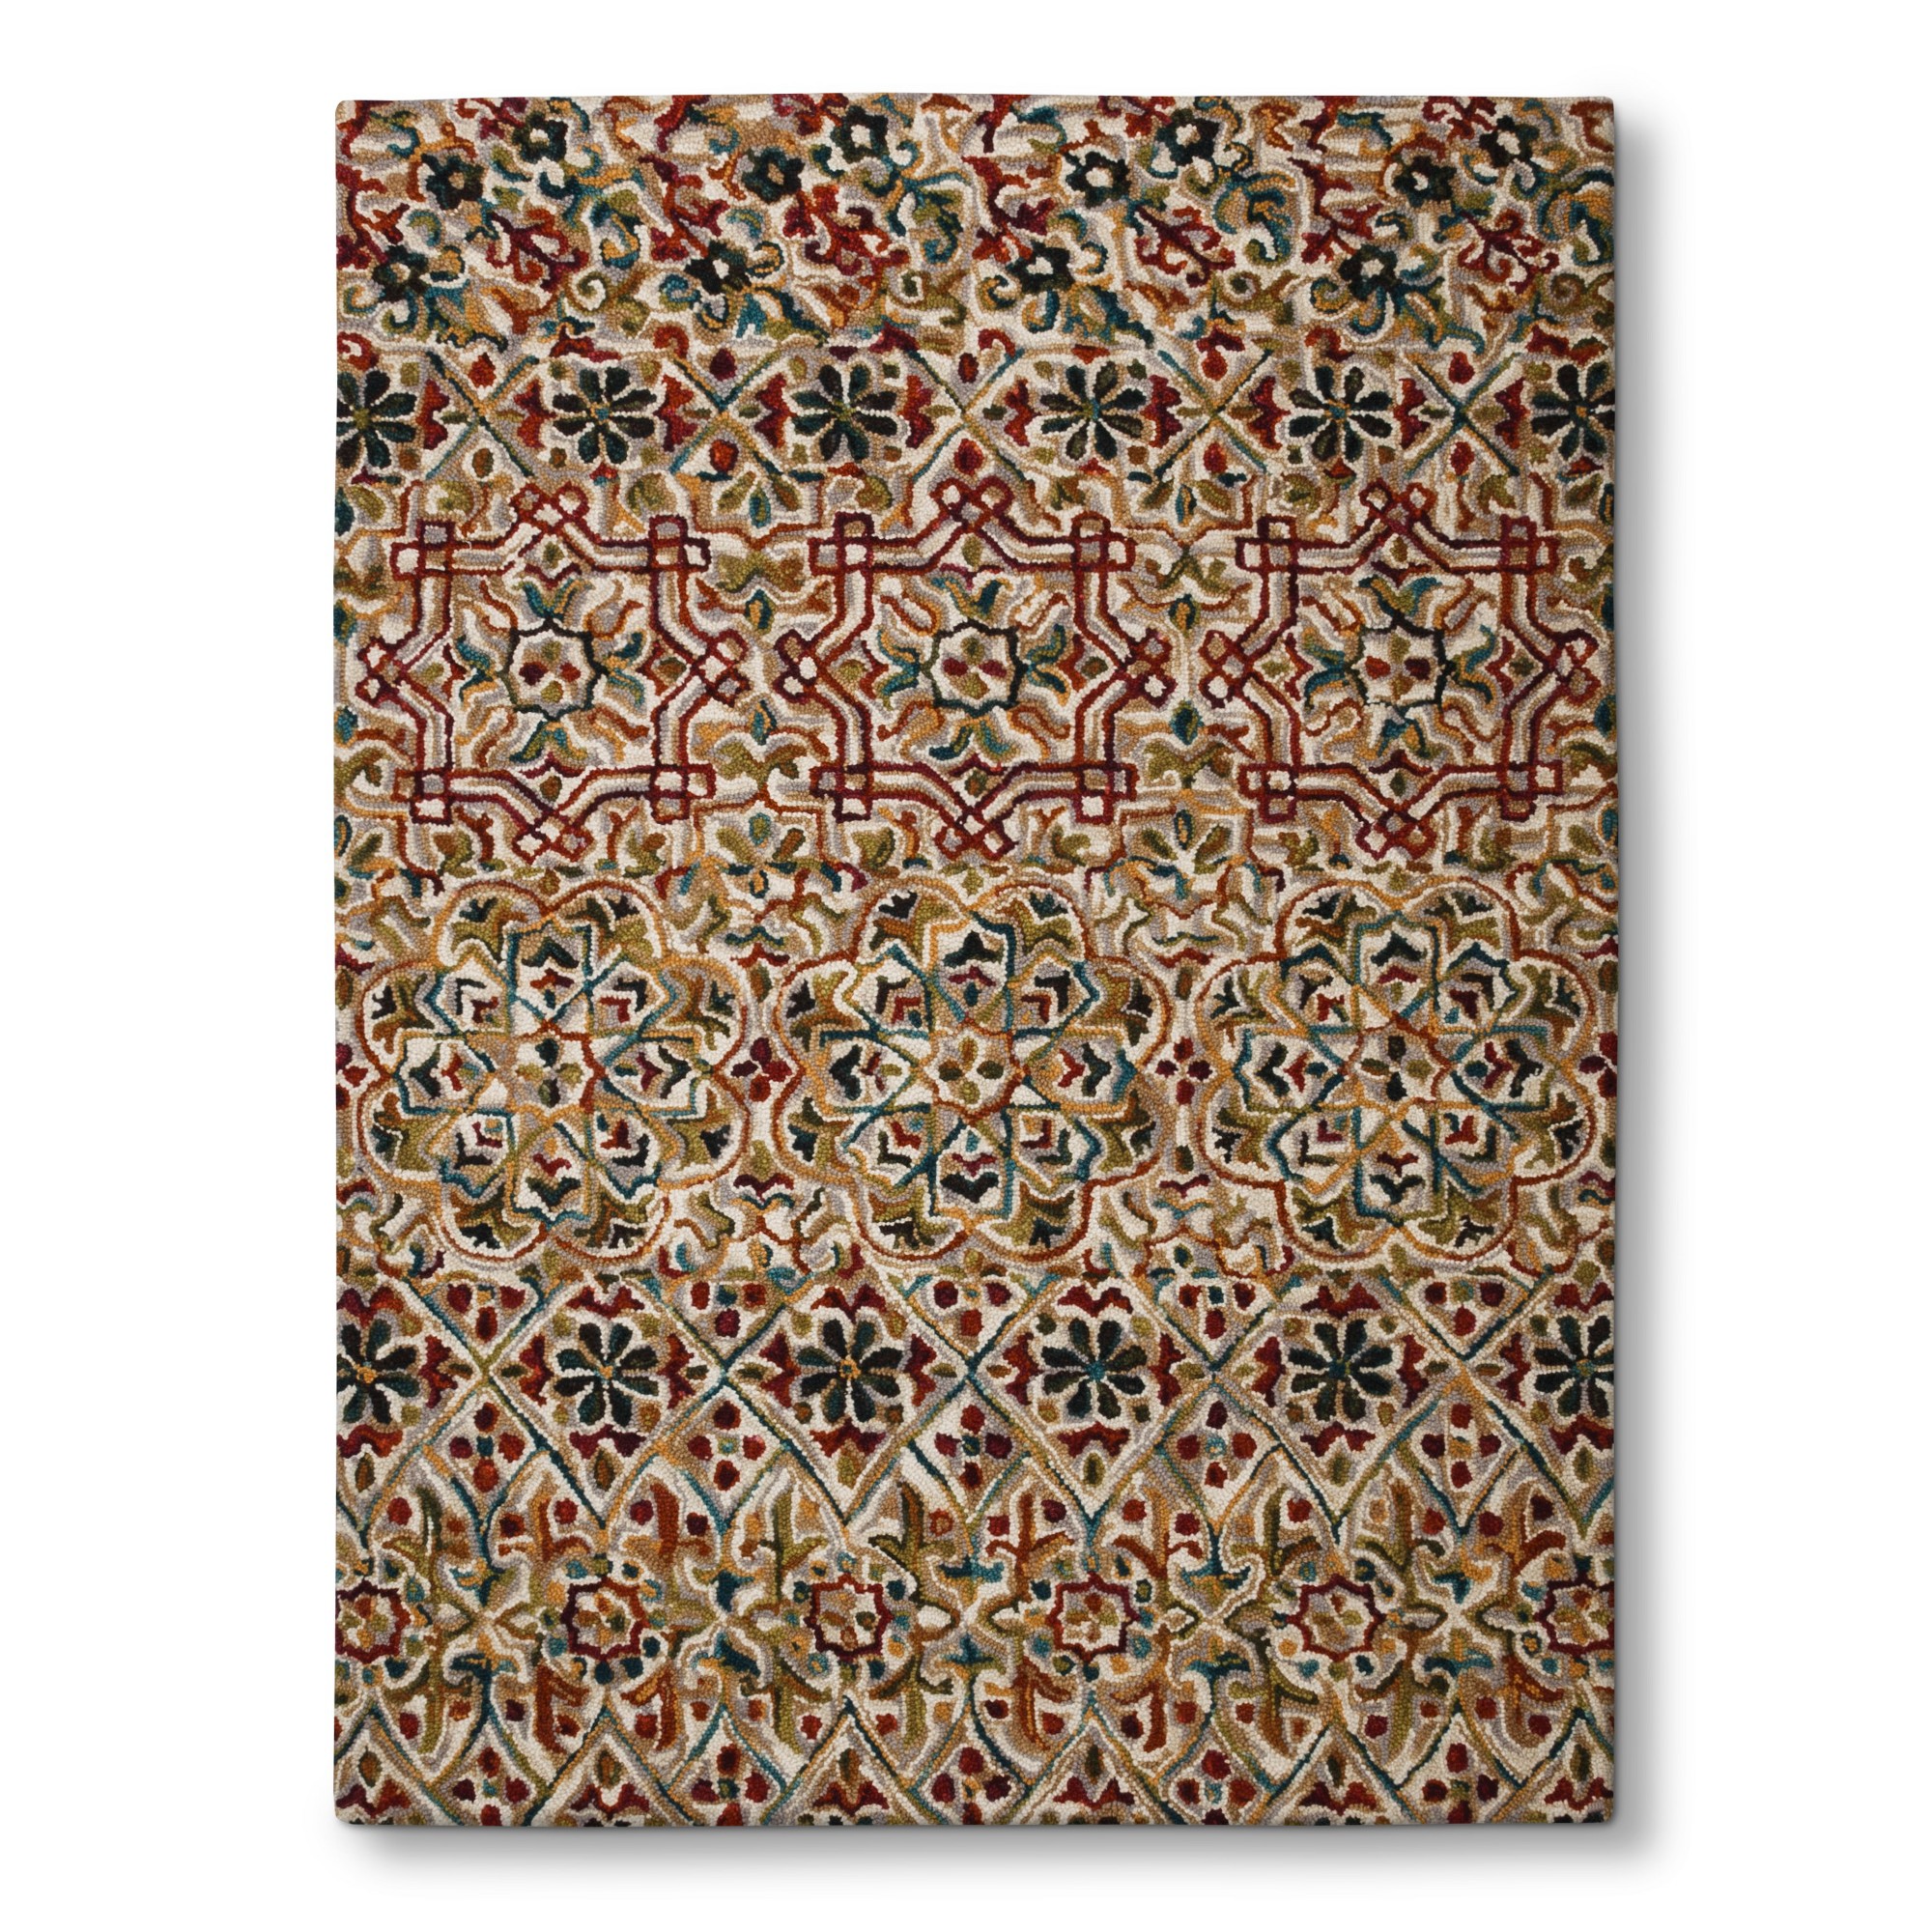 7'x10' Marrakesh accent rug Red - Threshold